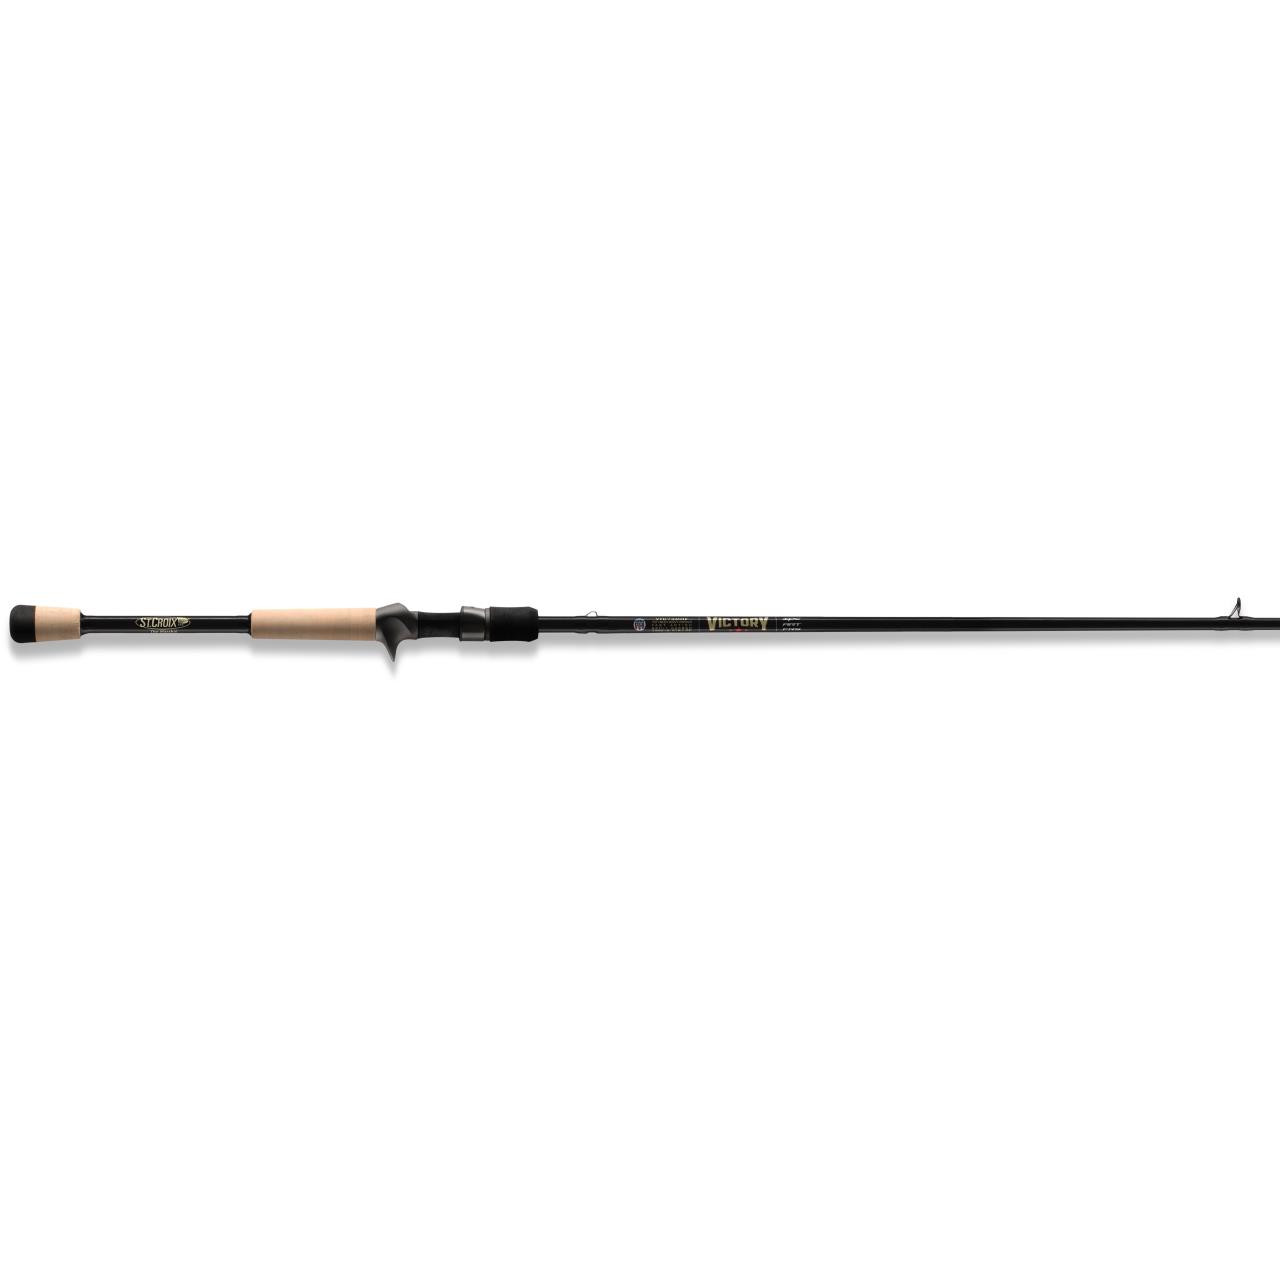 St Croix Victory Casting Rod 7'2 - Medium Heavy Power - Moderate Action -  Presleys Outdoors